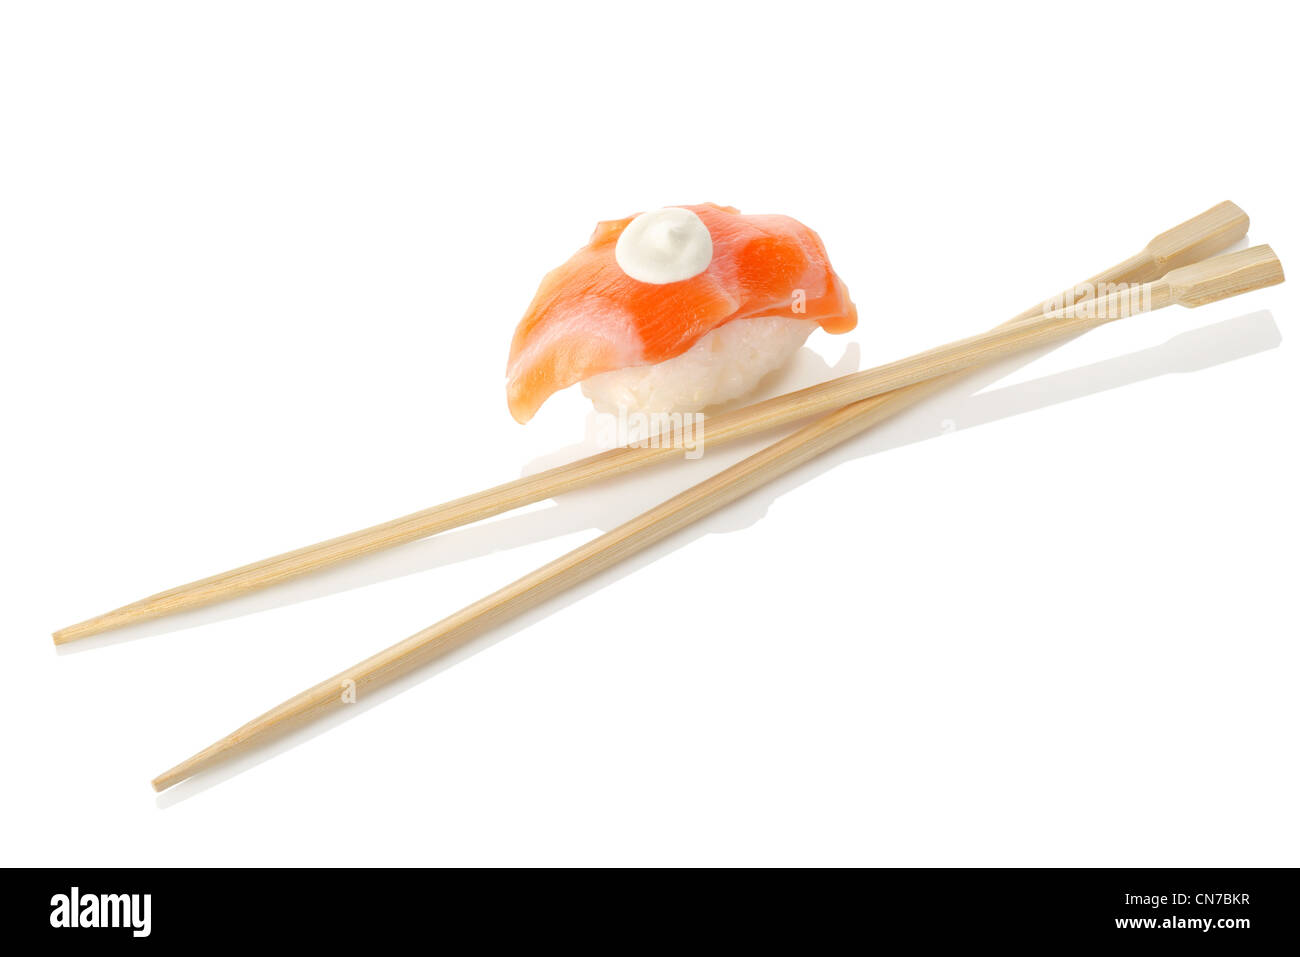 Wooden chopsticks and sushi isolated on a white background Stock Photo